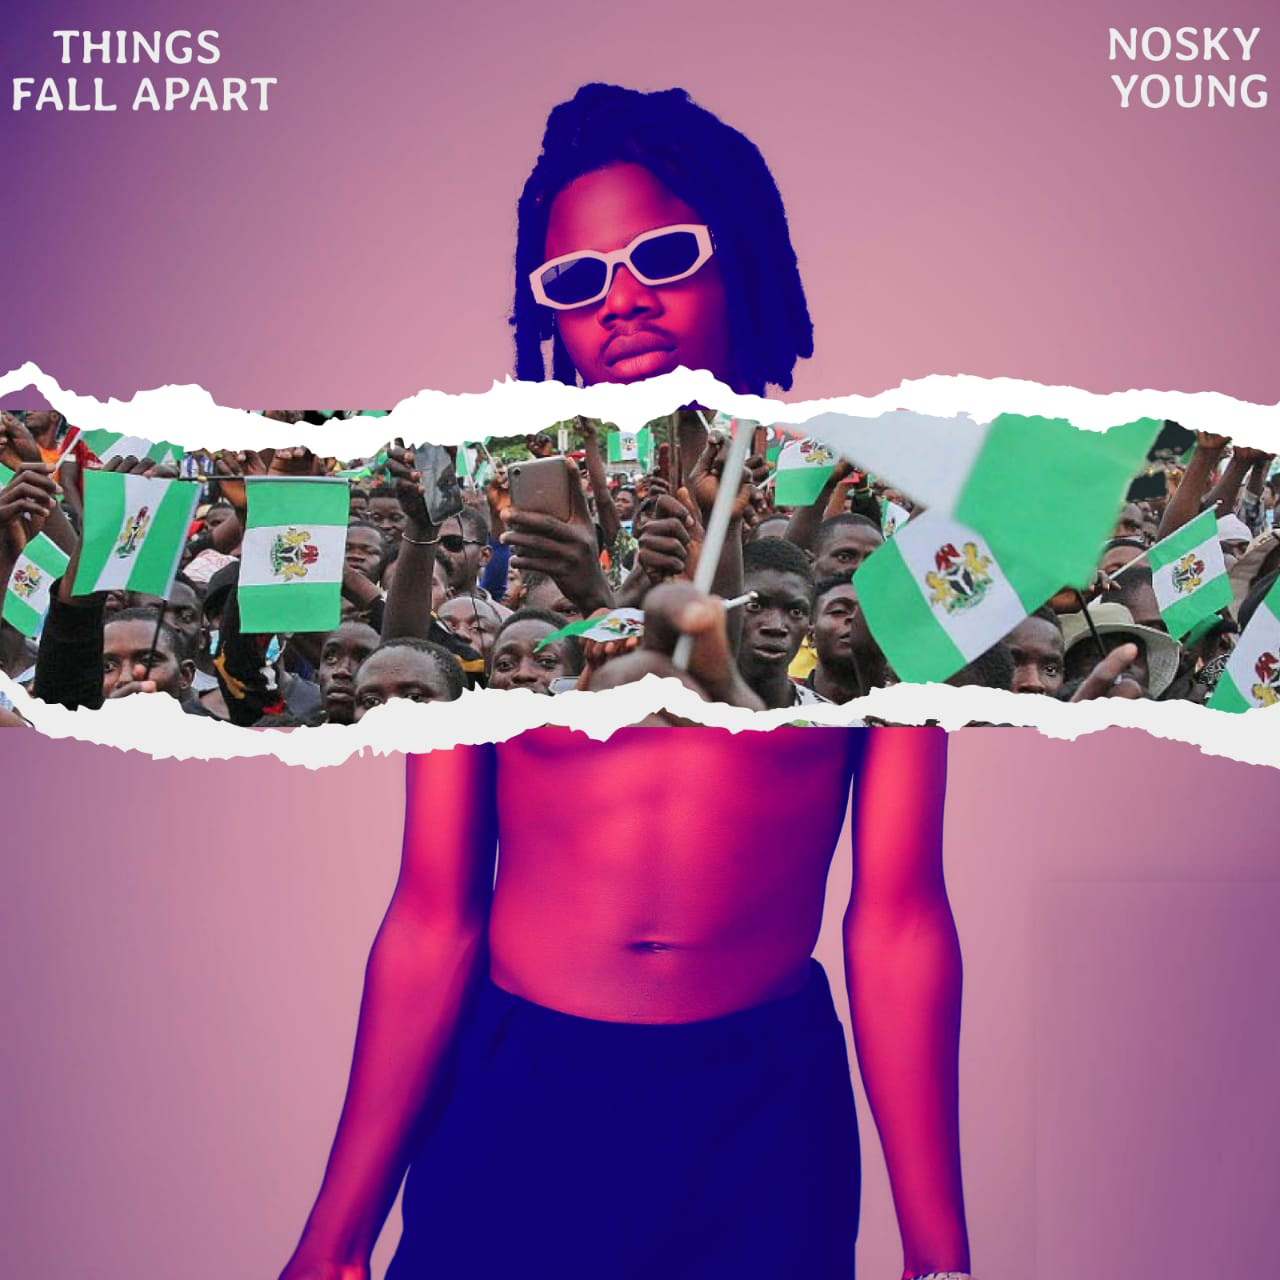 Nosky Young - Things Fall Apart